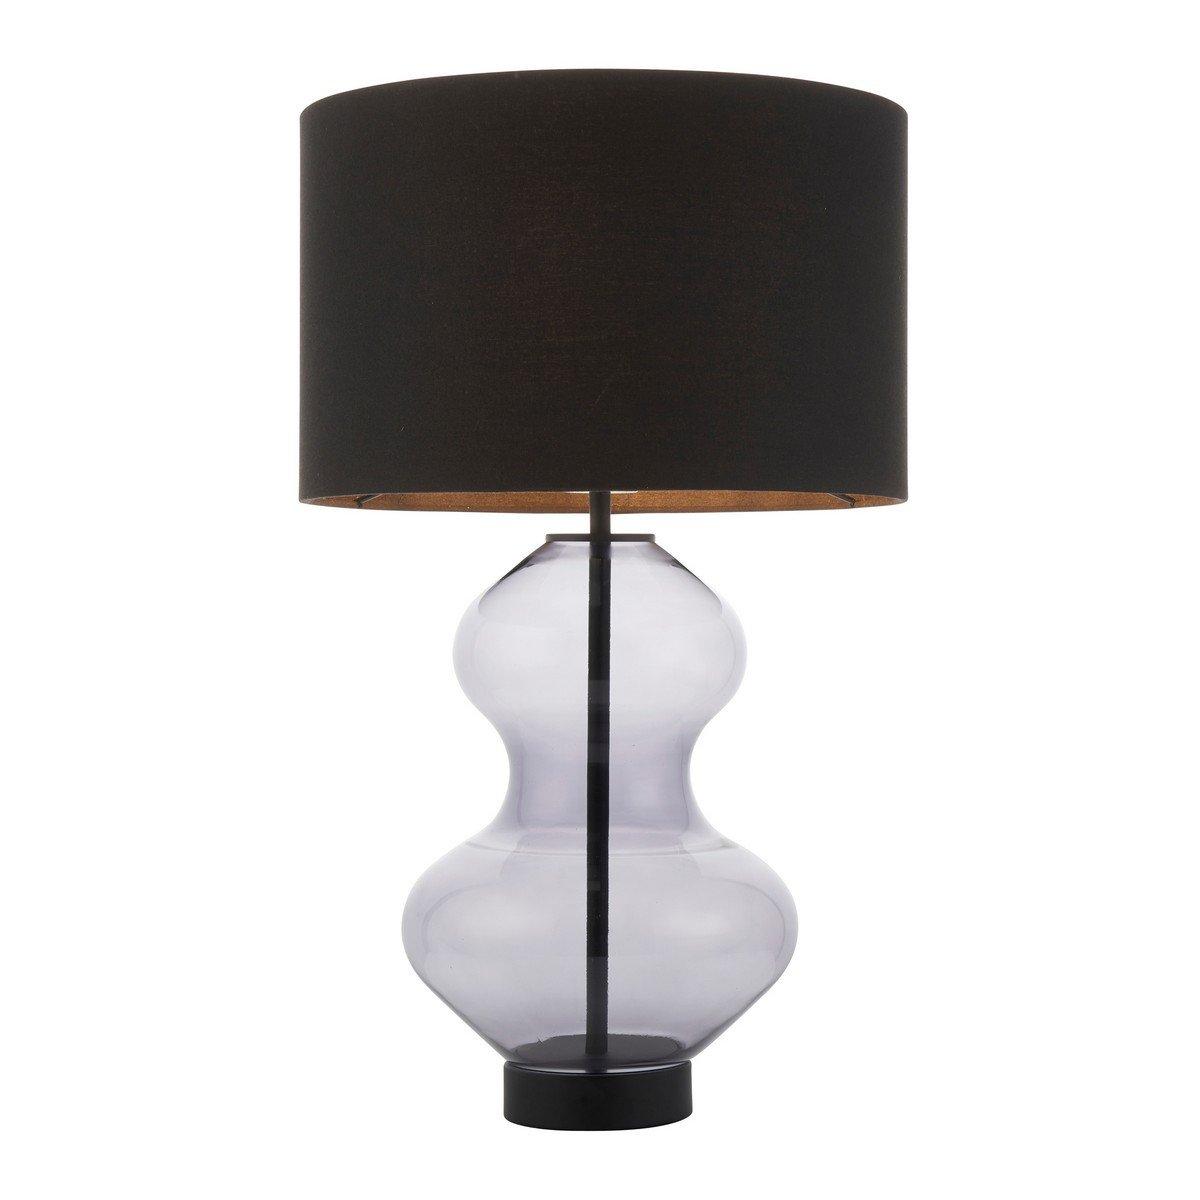 Lecce Base & Shade Table Lamp Grey Tinted Glass Black Cotton Fabric With Matt Black Paint